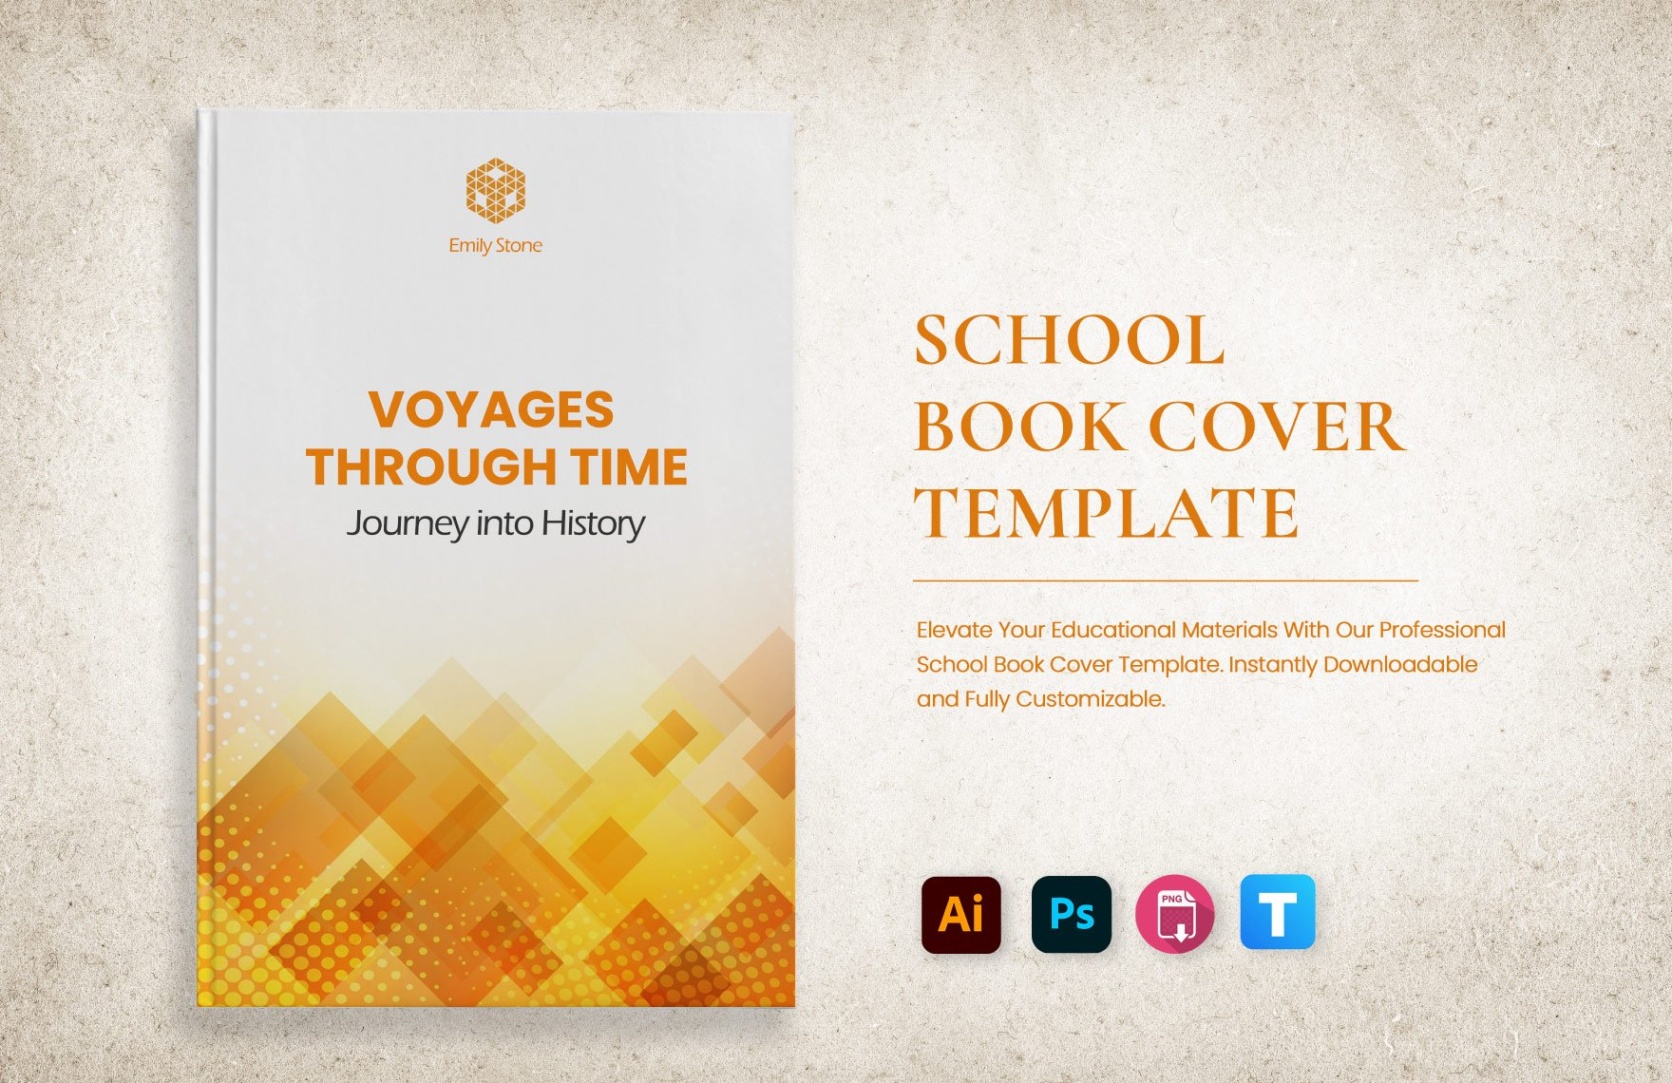 Get Creative With Our Ready-to-Use Book Cover Templates!